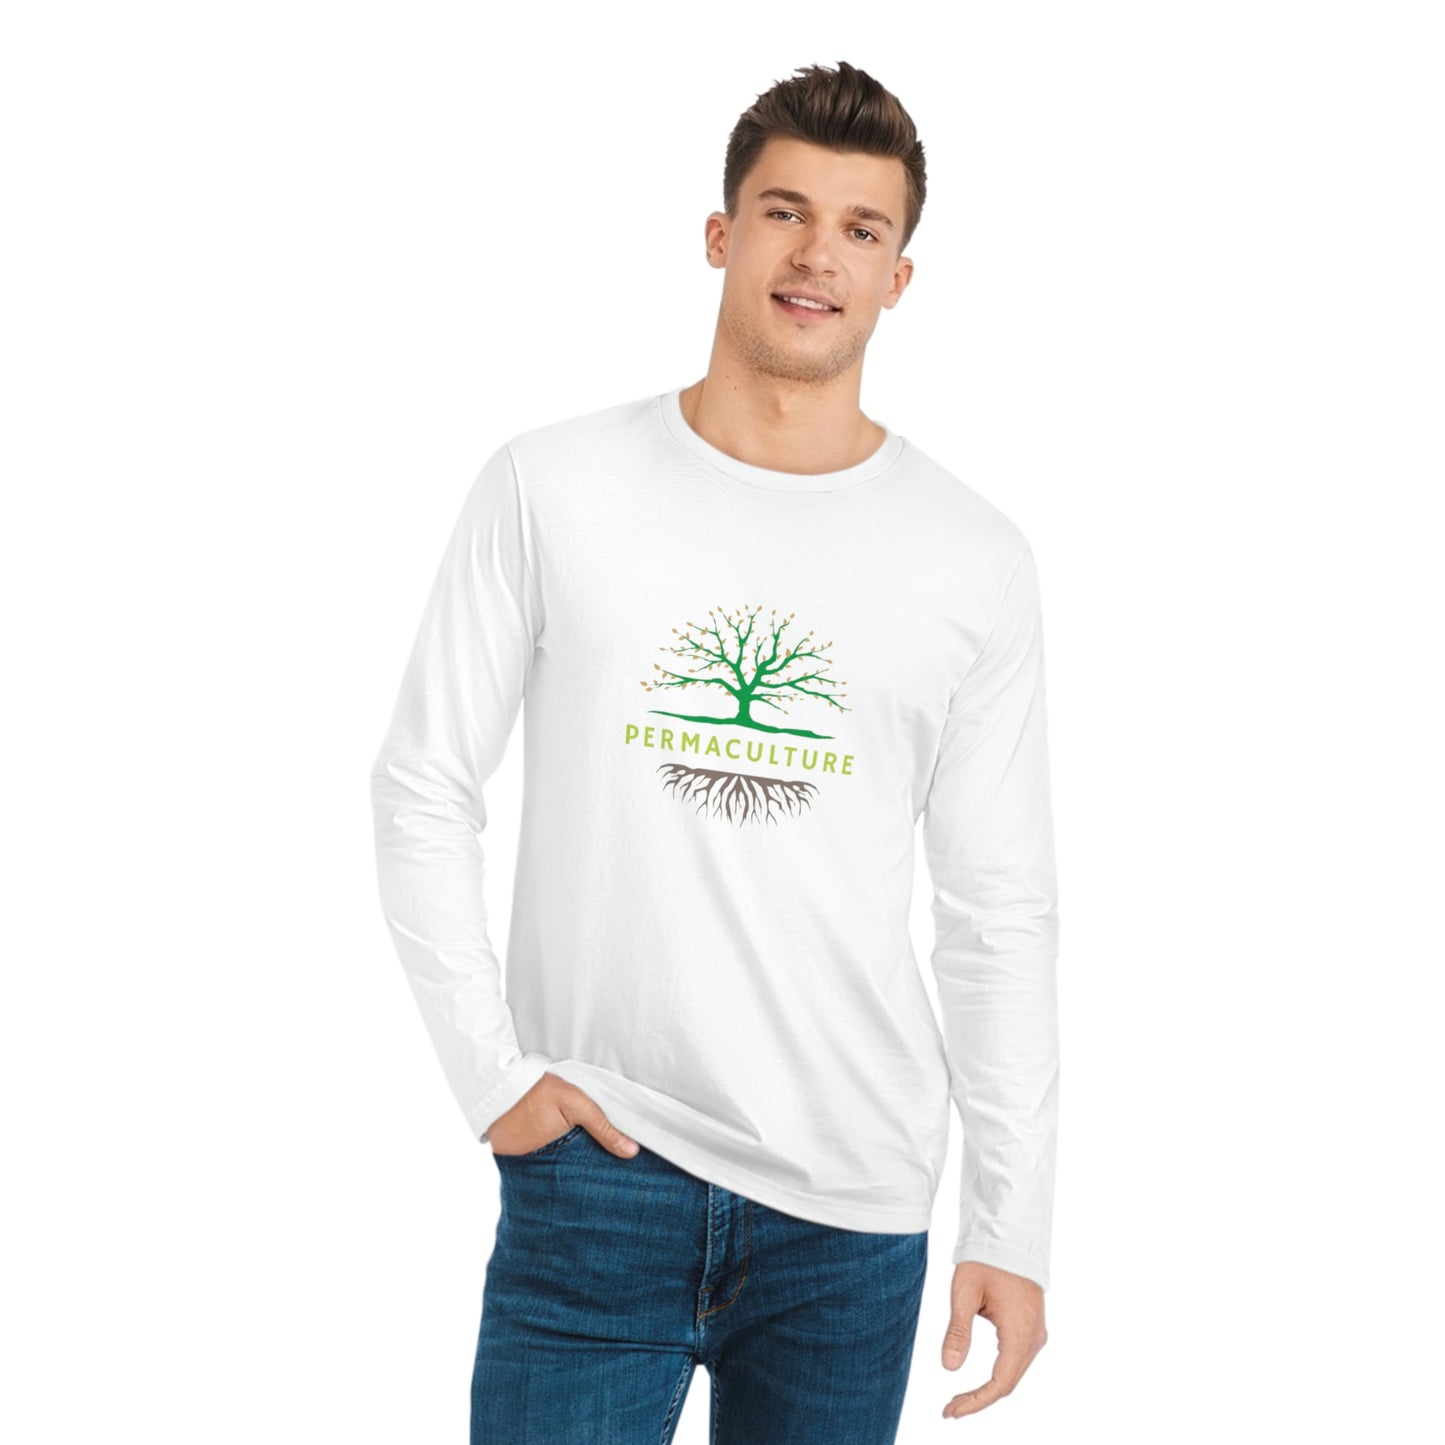 Permaculture - Men's Organic Sparker Long Sleeve Shirt